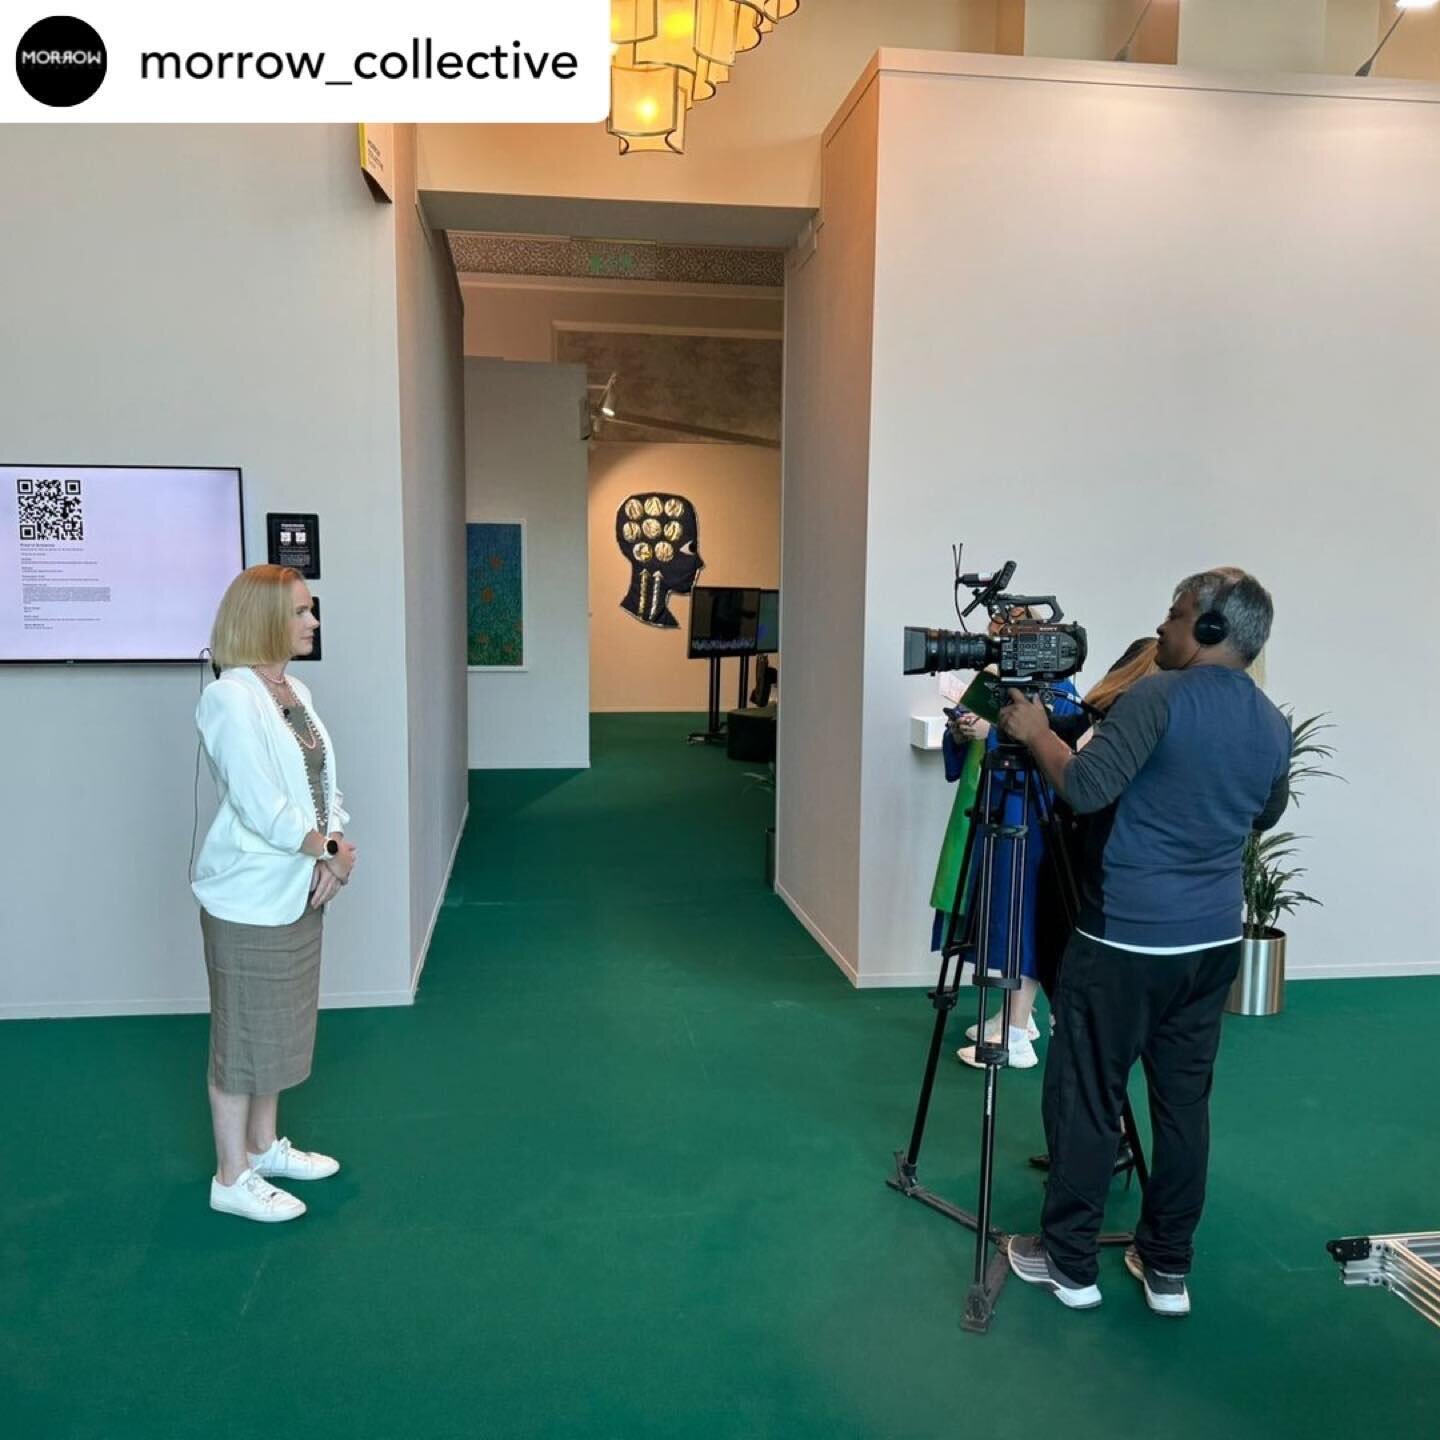 REPOST &bull; @morrow_collective Pleasure welcoming Getty to {R(Evolutionaries);} 

With our curator, @annaseaman1 

#MORROWcollective
#revolutionaries
#artdubai
#getty
@artdubai